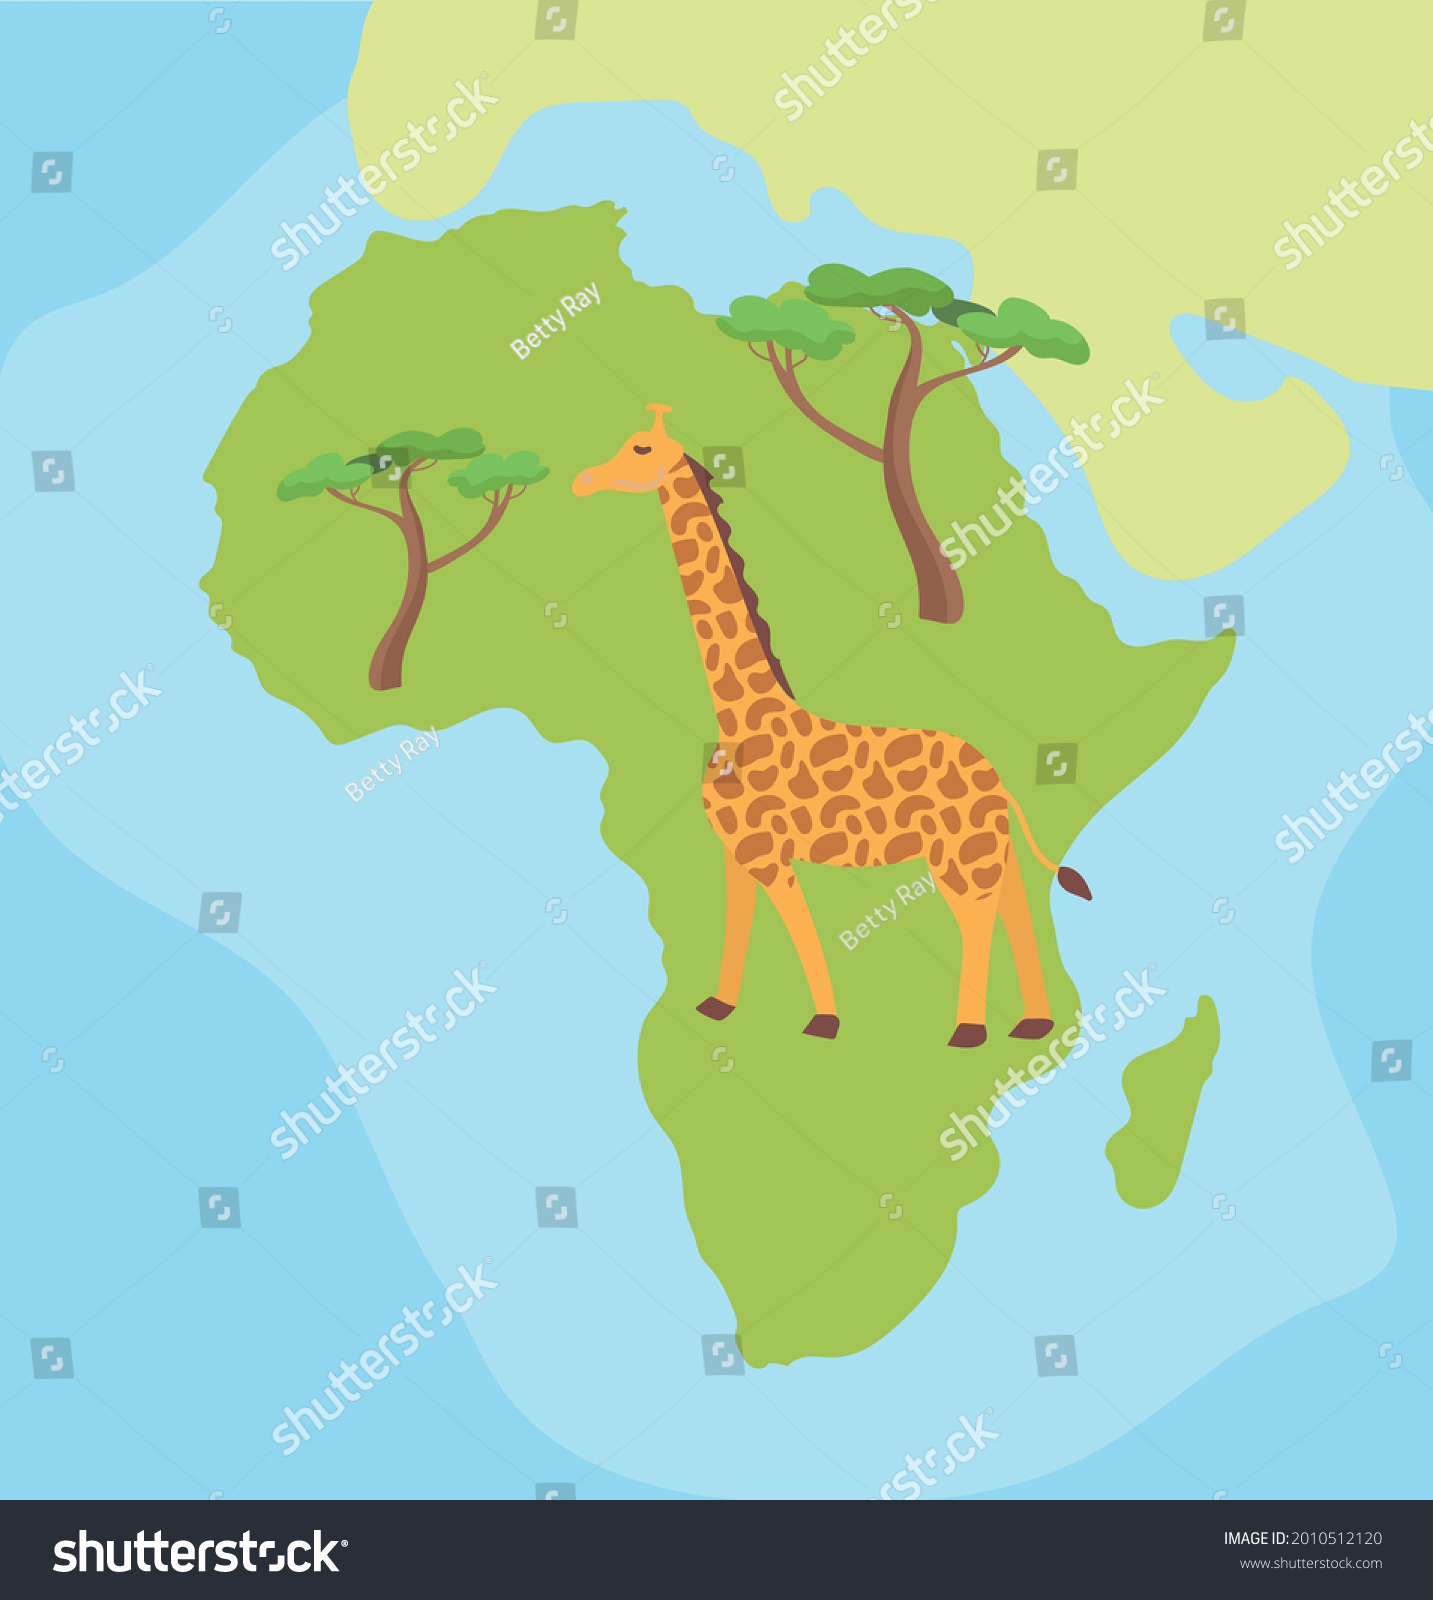 Cartoon Hand Drawn Illustrated Map Africa Stock Vector Royalty Free 2010512120 Shutterstock 3259